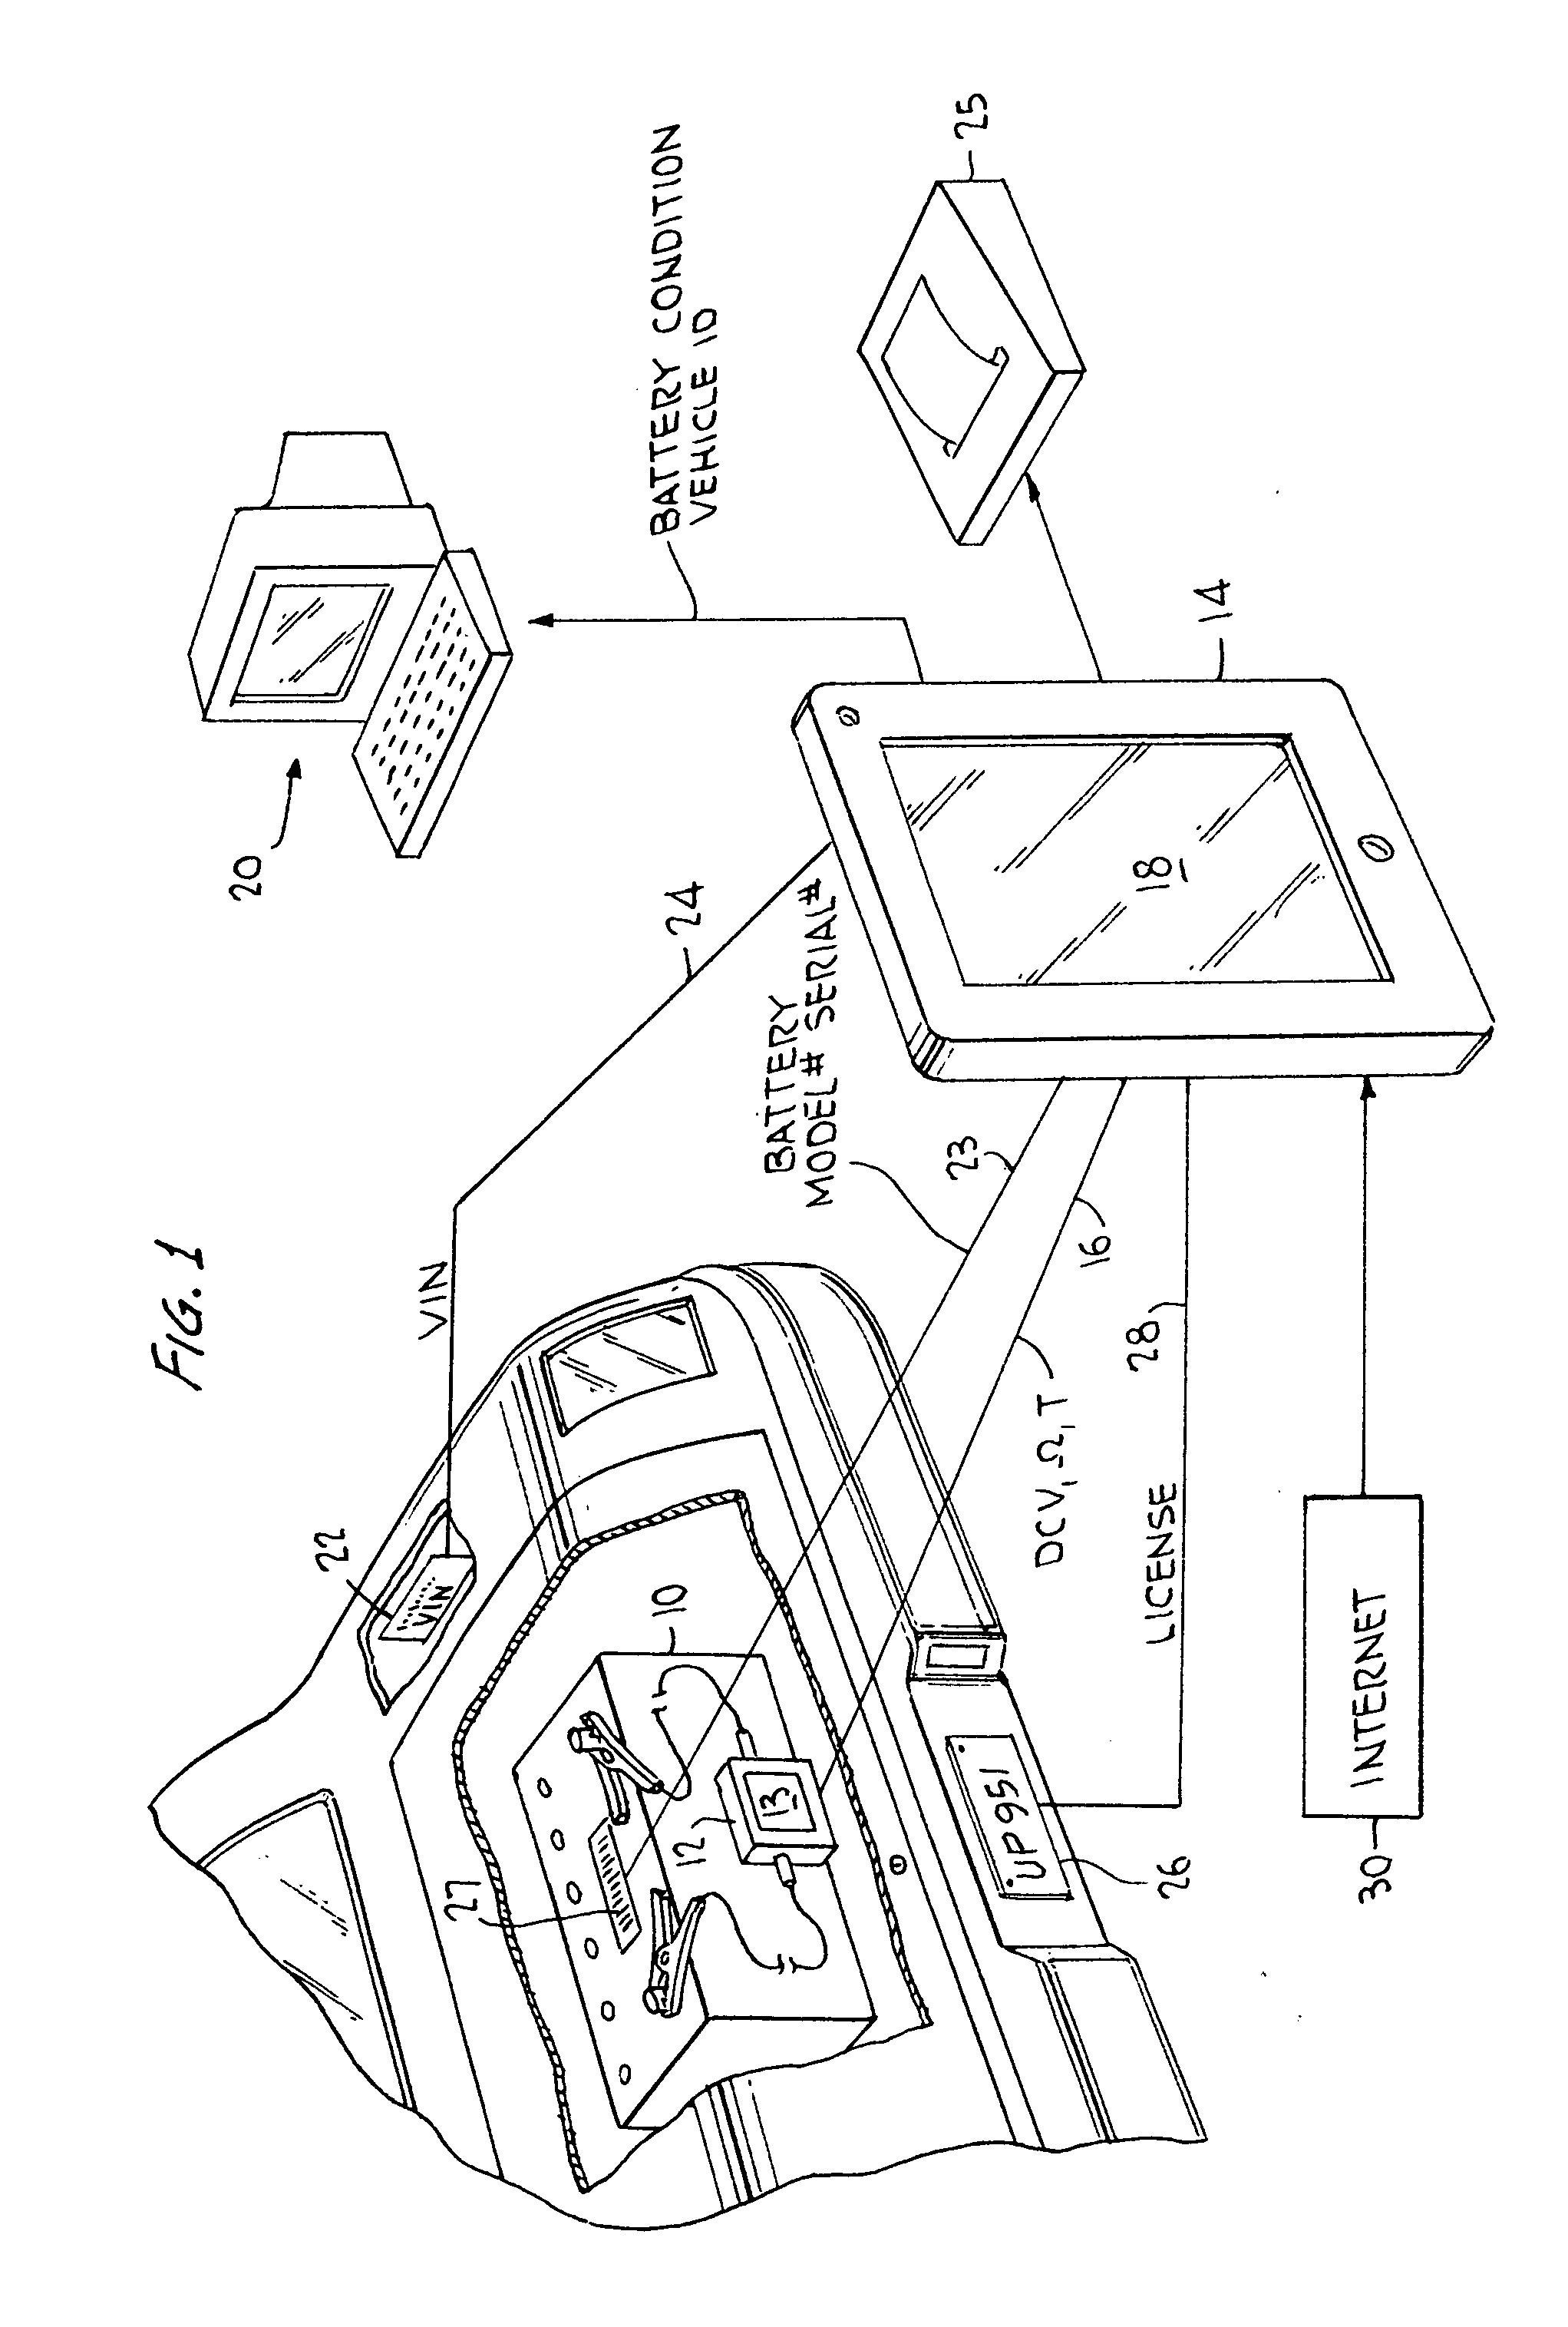 Tester for equipment, apparatus or component with distributed processing function